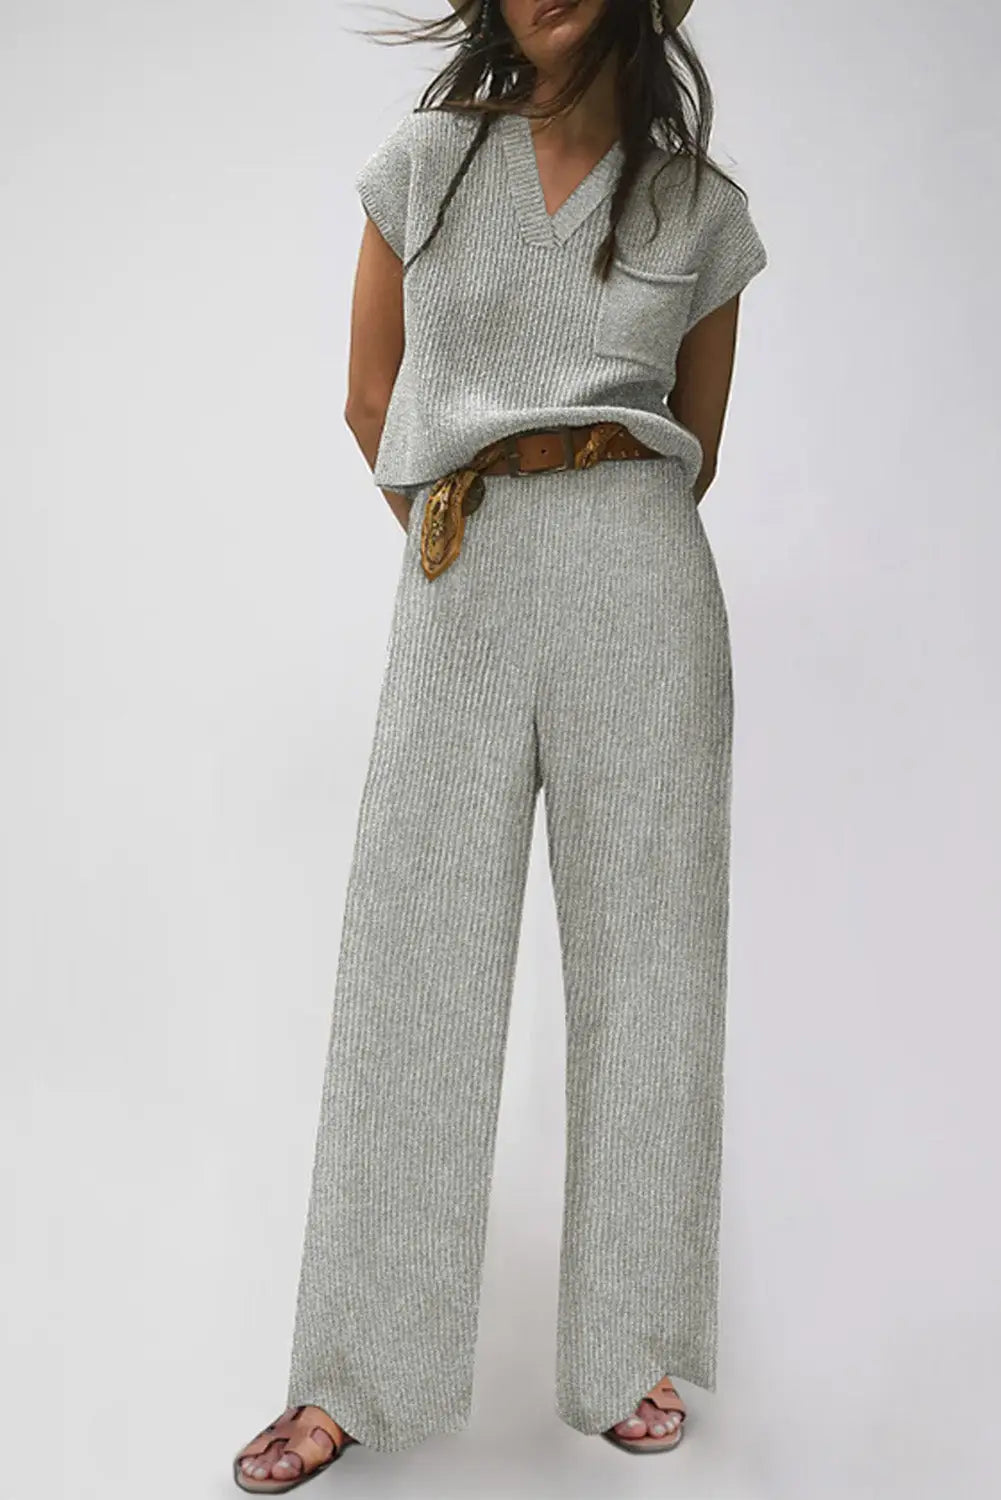 Gray knitted v neck sweater and casual pants set - s / 60% cotton + 40% acrylic - loungewear